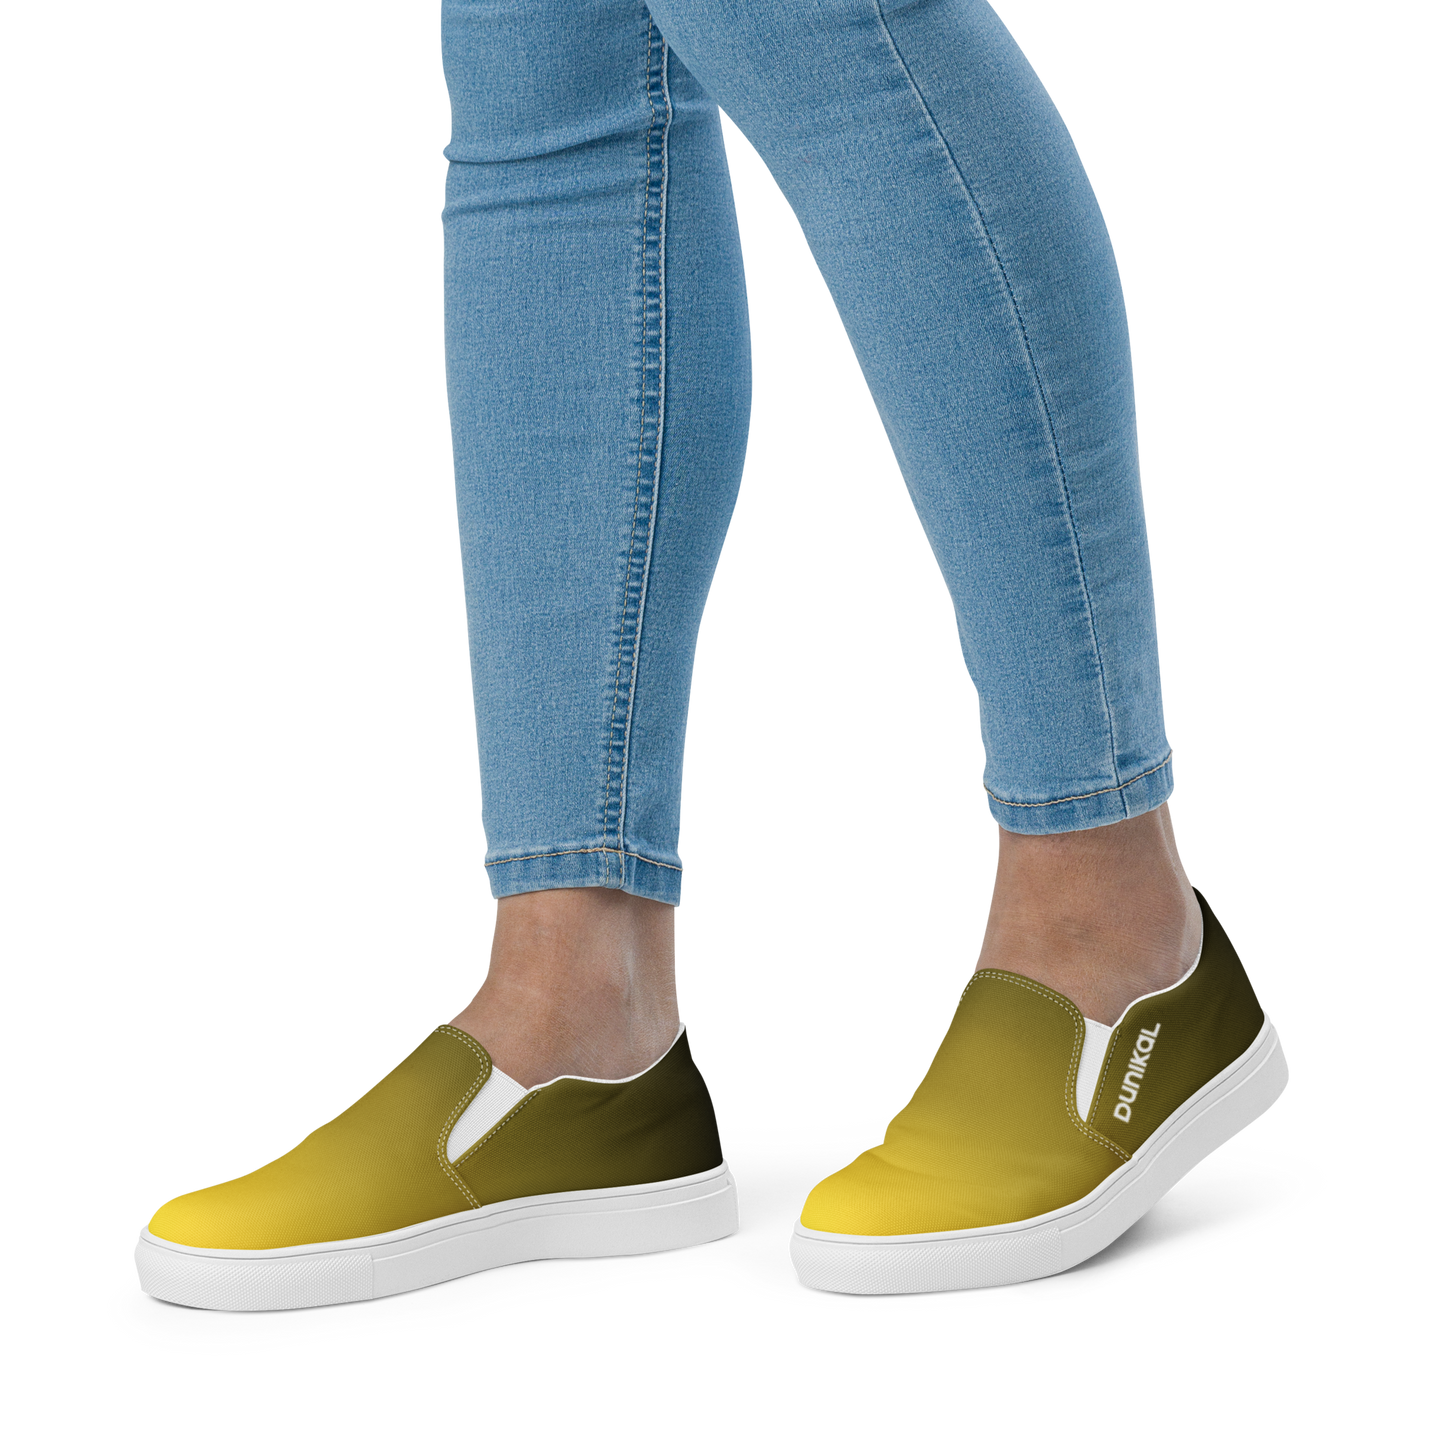 Women's Canvas Slip-Ons ❯ Pure Gradient ❯ Rayon